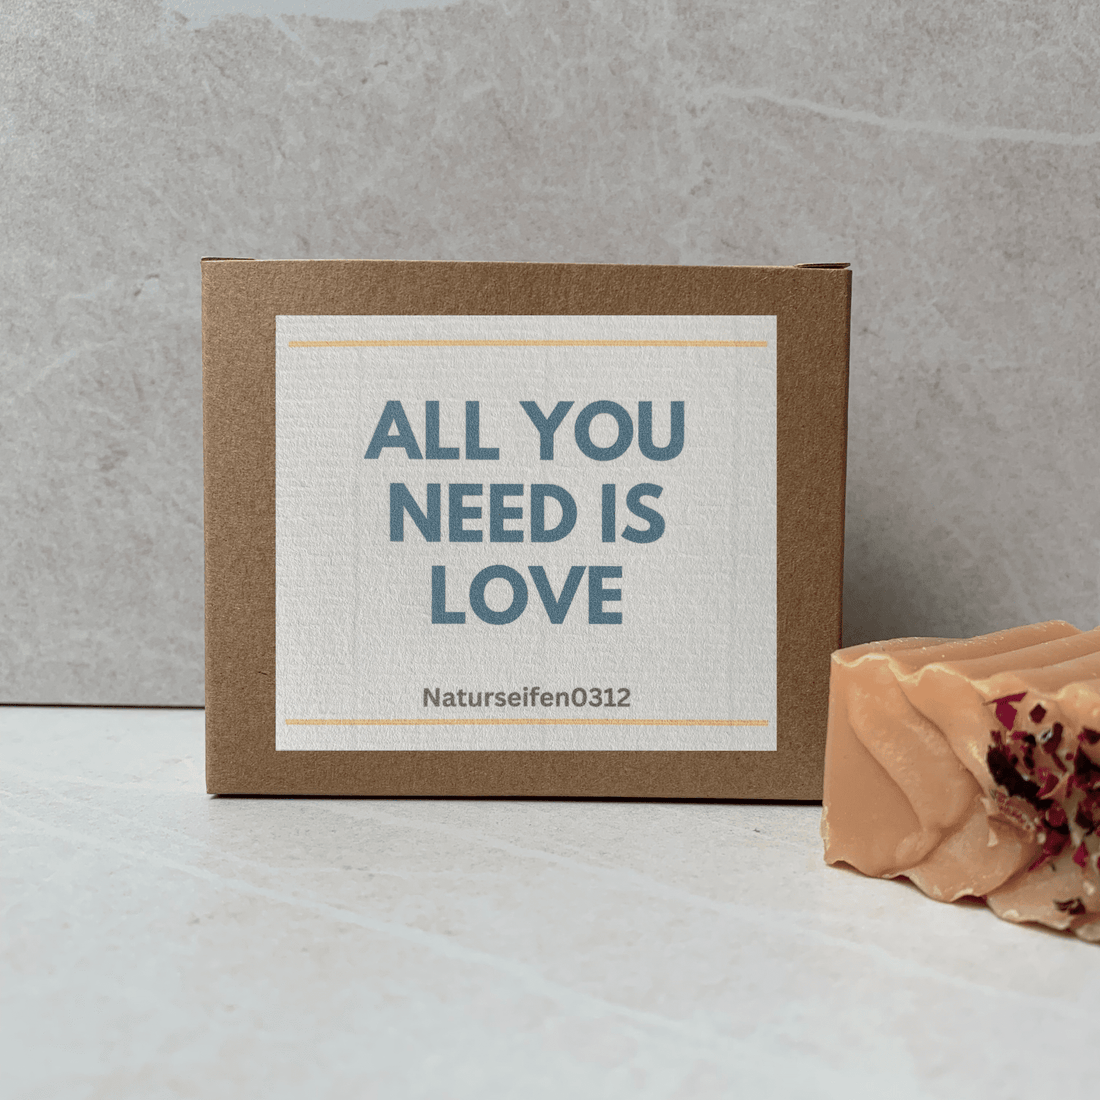 Liebe - All you need